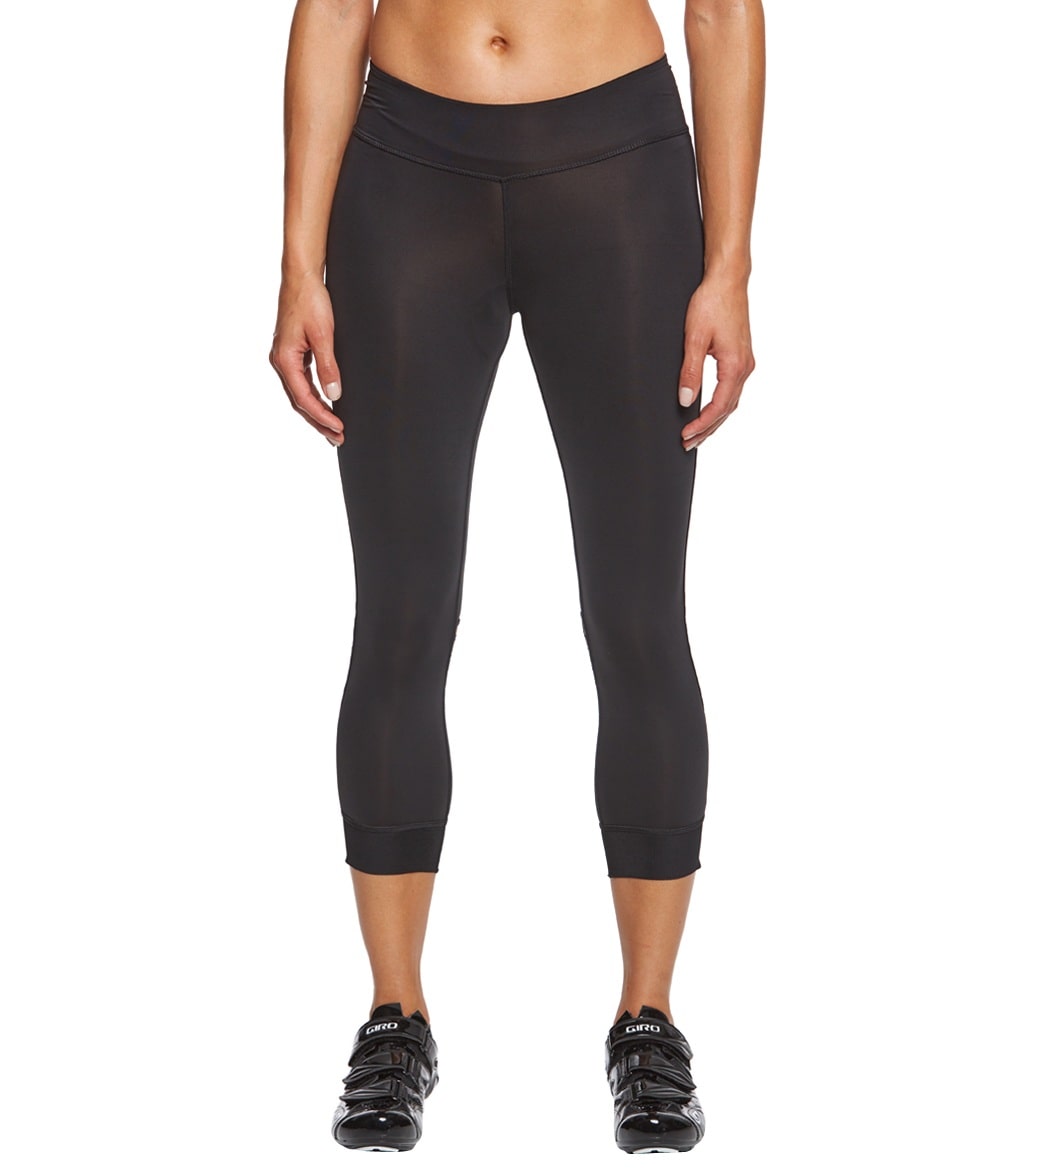 Shebeest Women's Indie Convertible Capri at SwimOutlet.com - Free Shipping